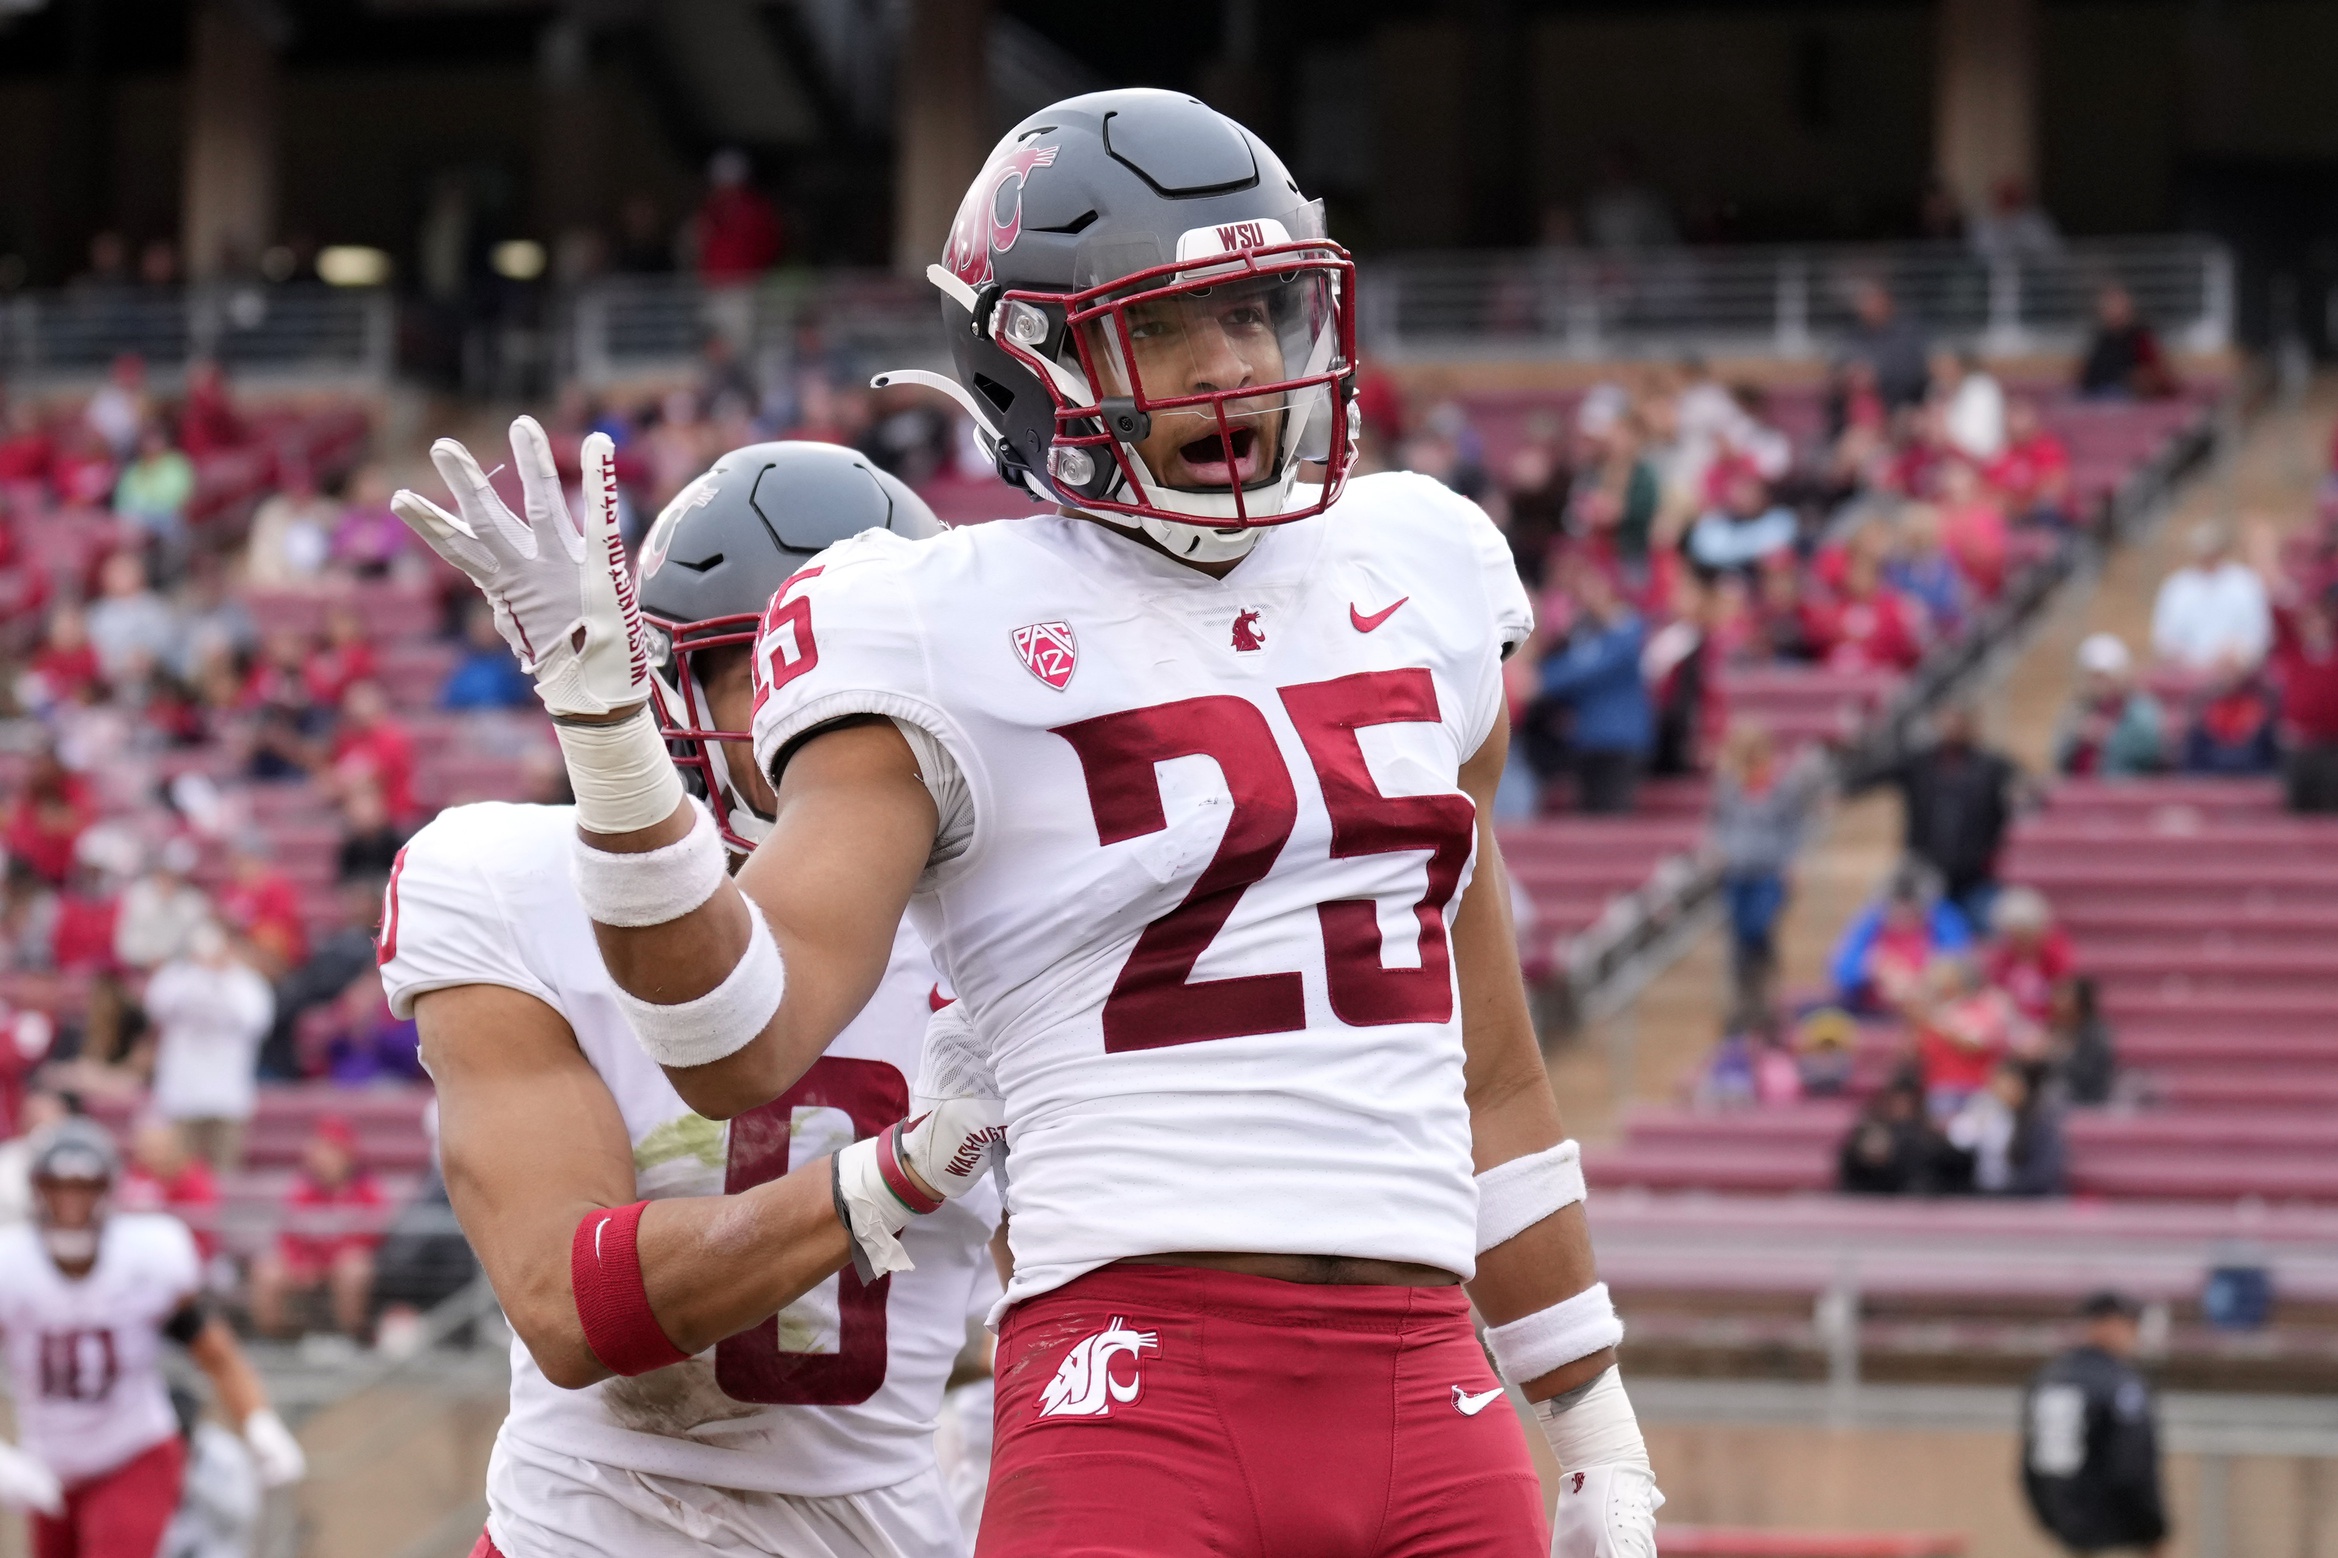 Washington State Cougars defensive back Jaden Hicks (25) celebrates after scoring a touchdown against the Stanford Cardinal during the second quarter at Stanford Stadium.